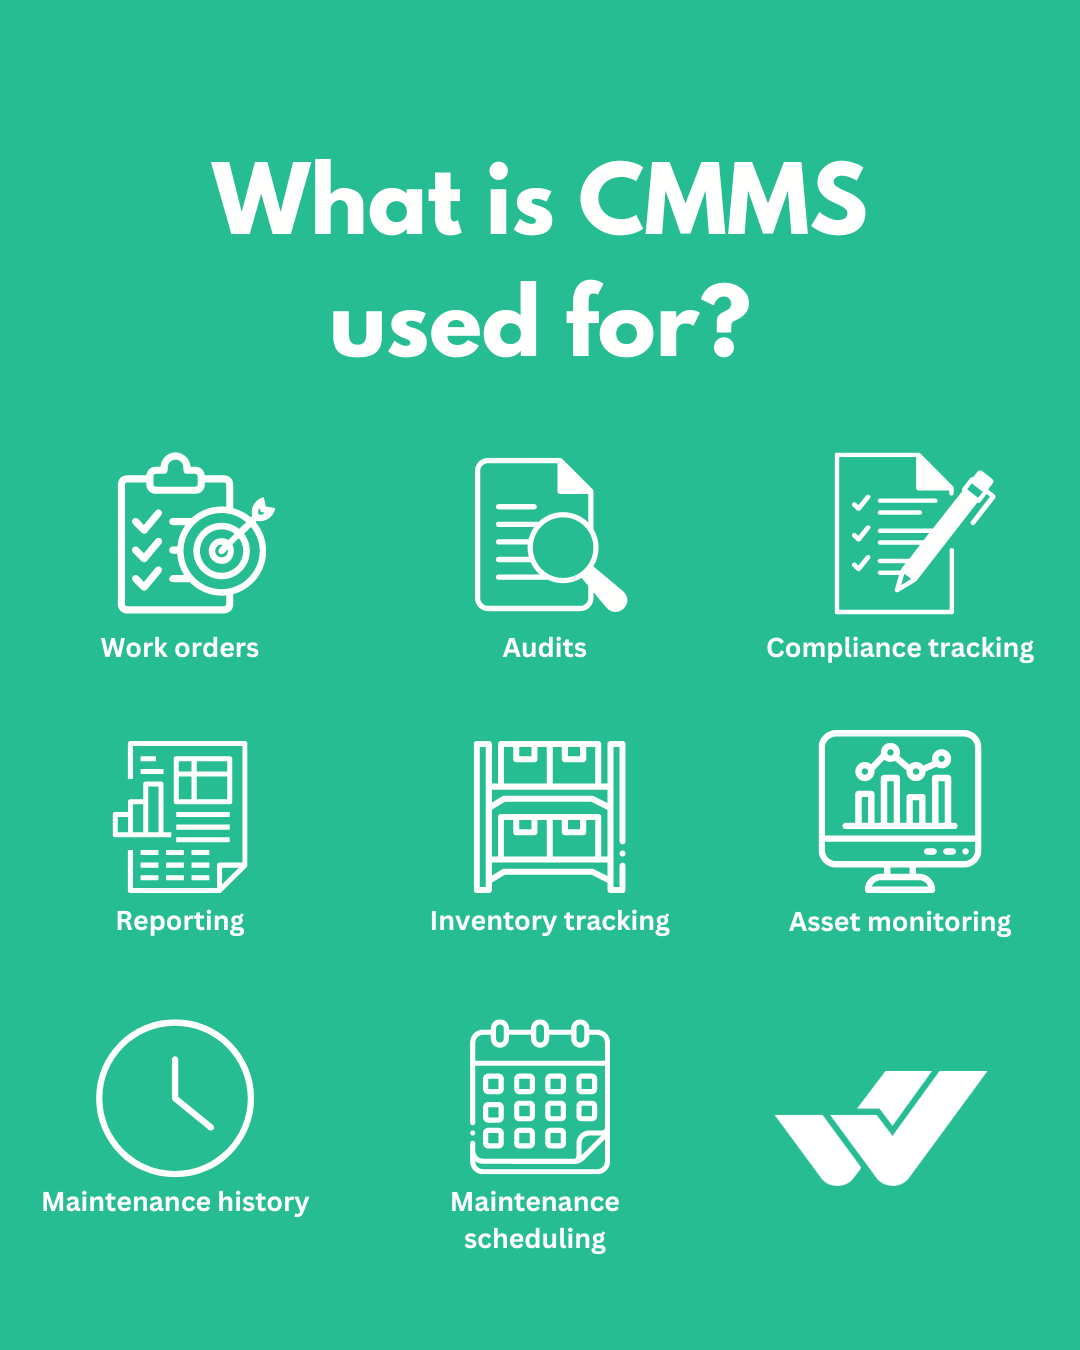 What is CMMS used for?